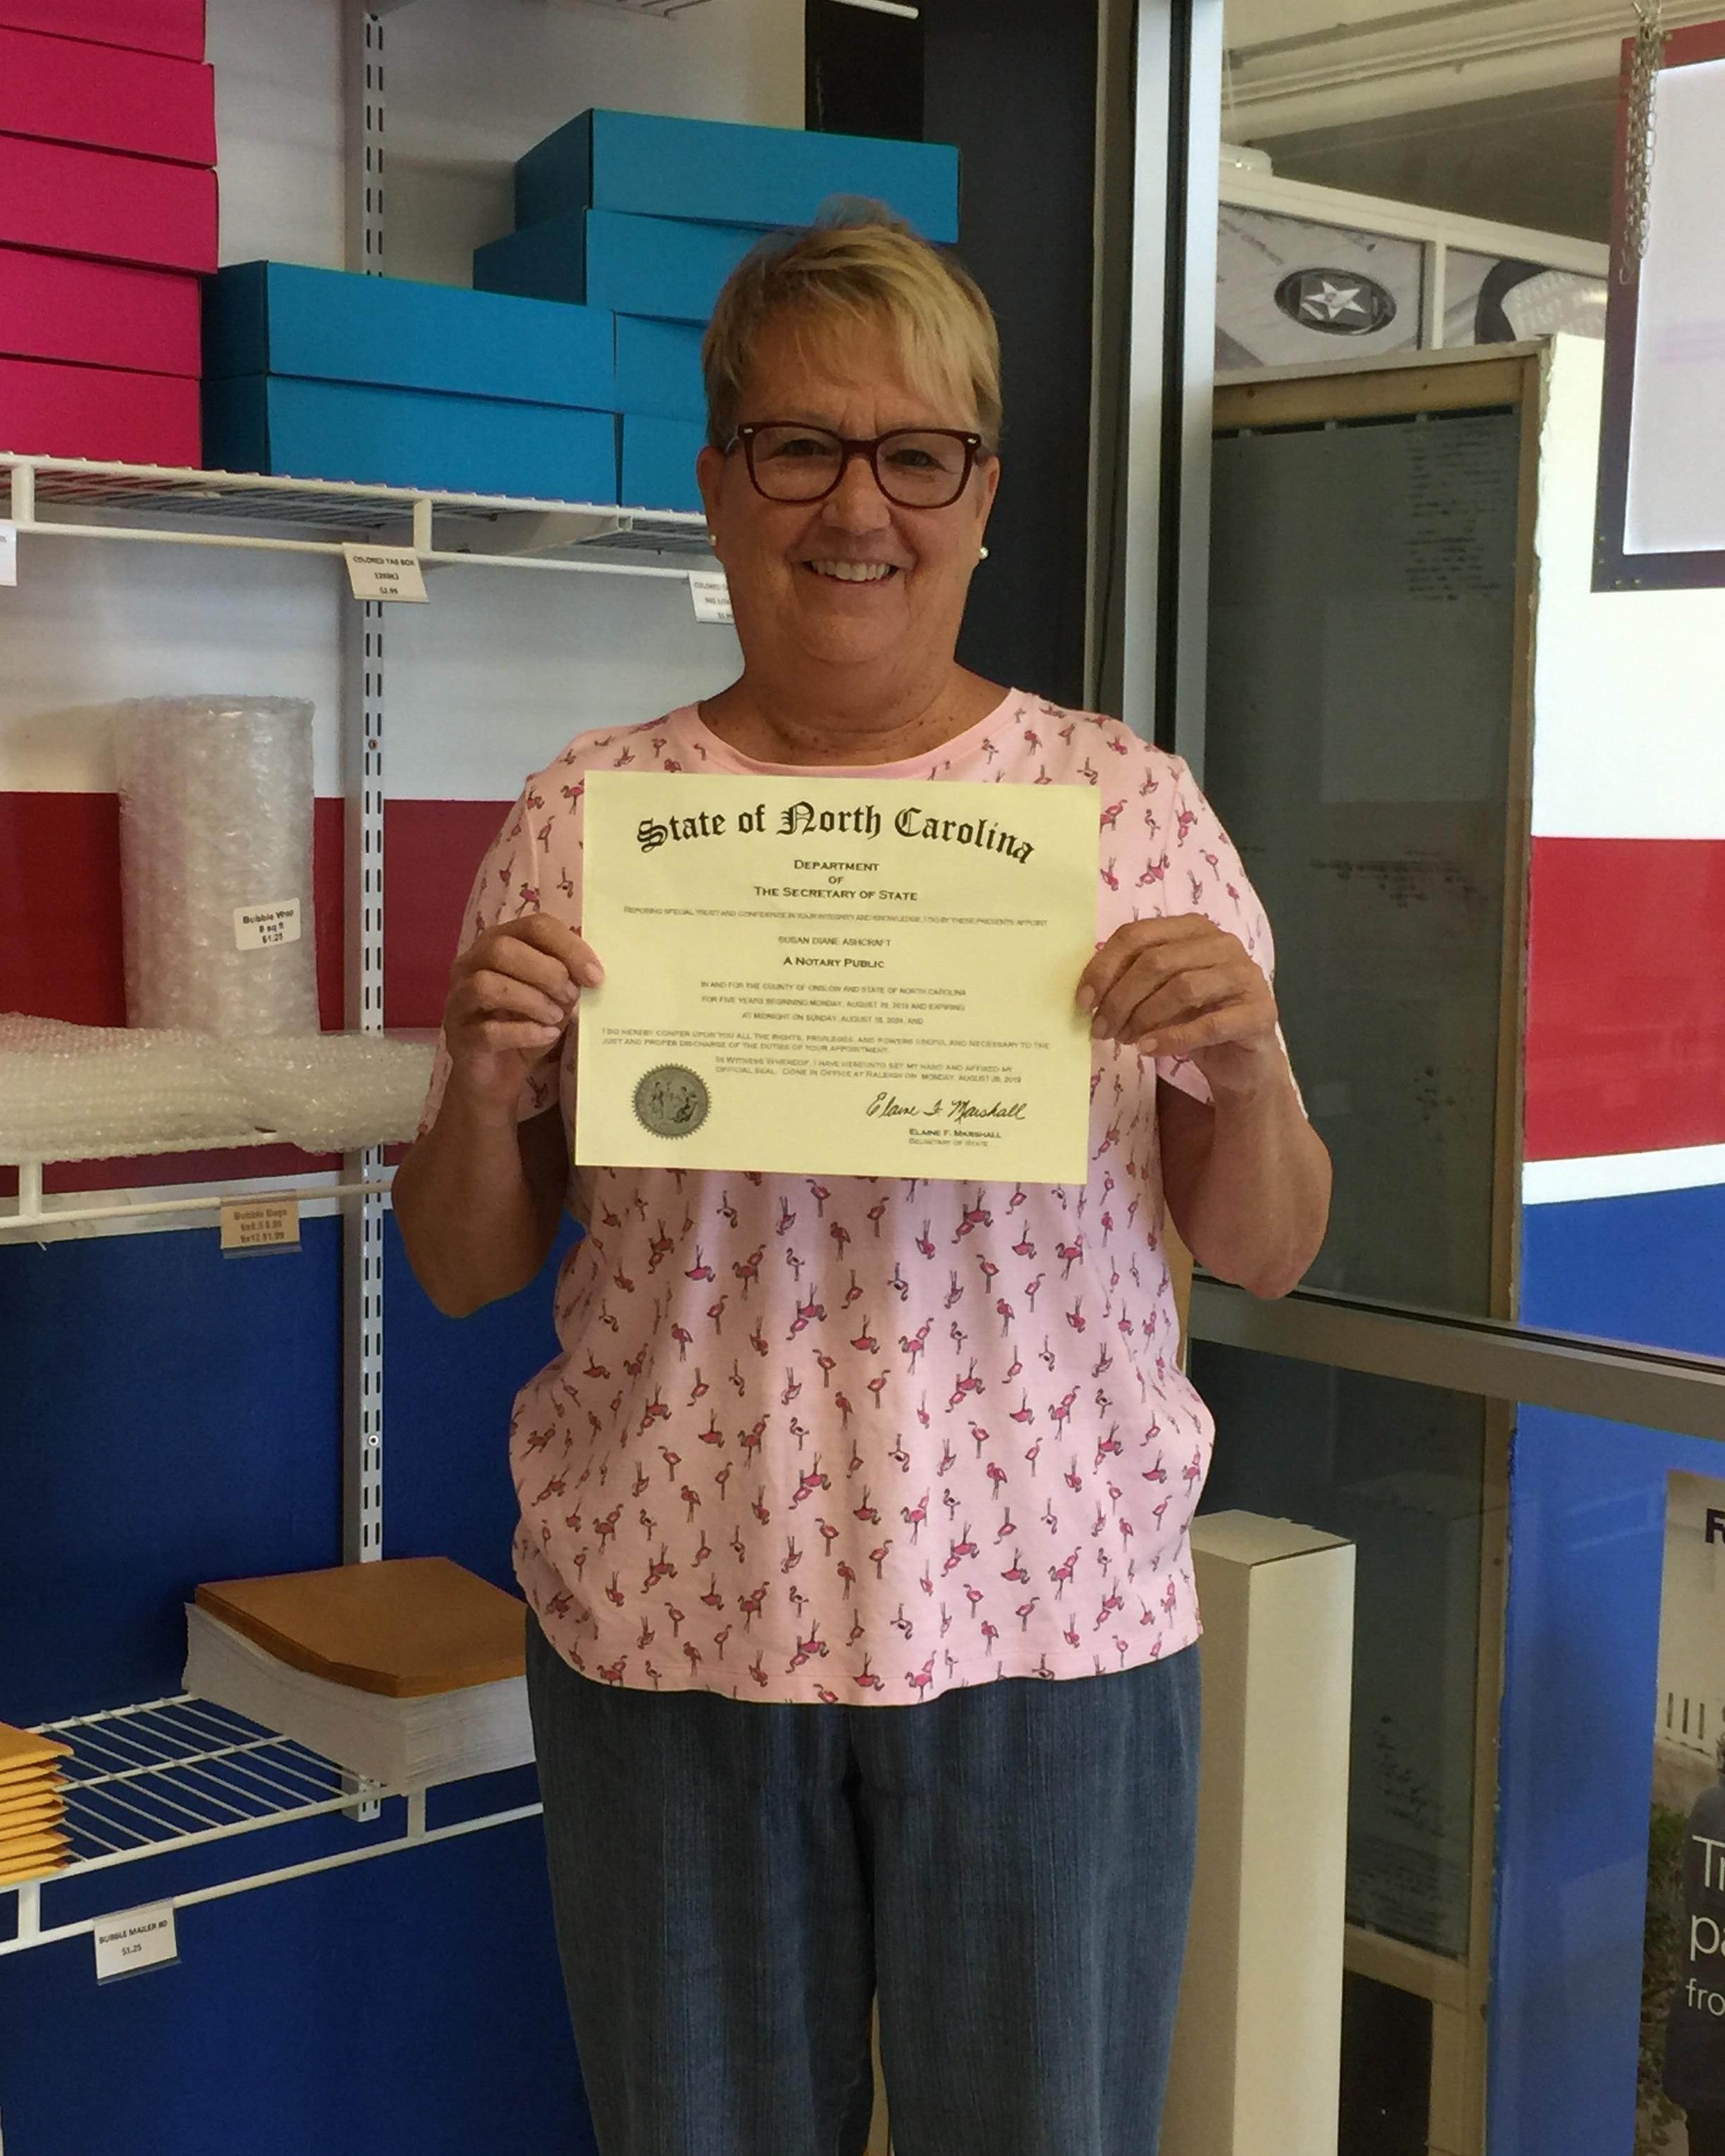 Congratulations to our newest notary Diane! She passed her state exam and is now a licensed notary for North Carolina. Stop by Goin’ Postal of Camp Lejeune to tell her job well done. While there, remember we can handle all your mailing and shipping needs with any carrier- UPS, FedEx, USPS, DHL.